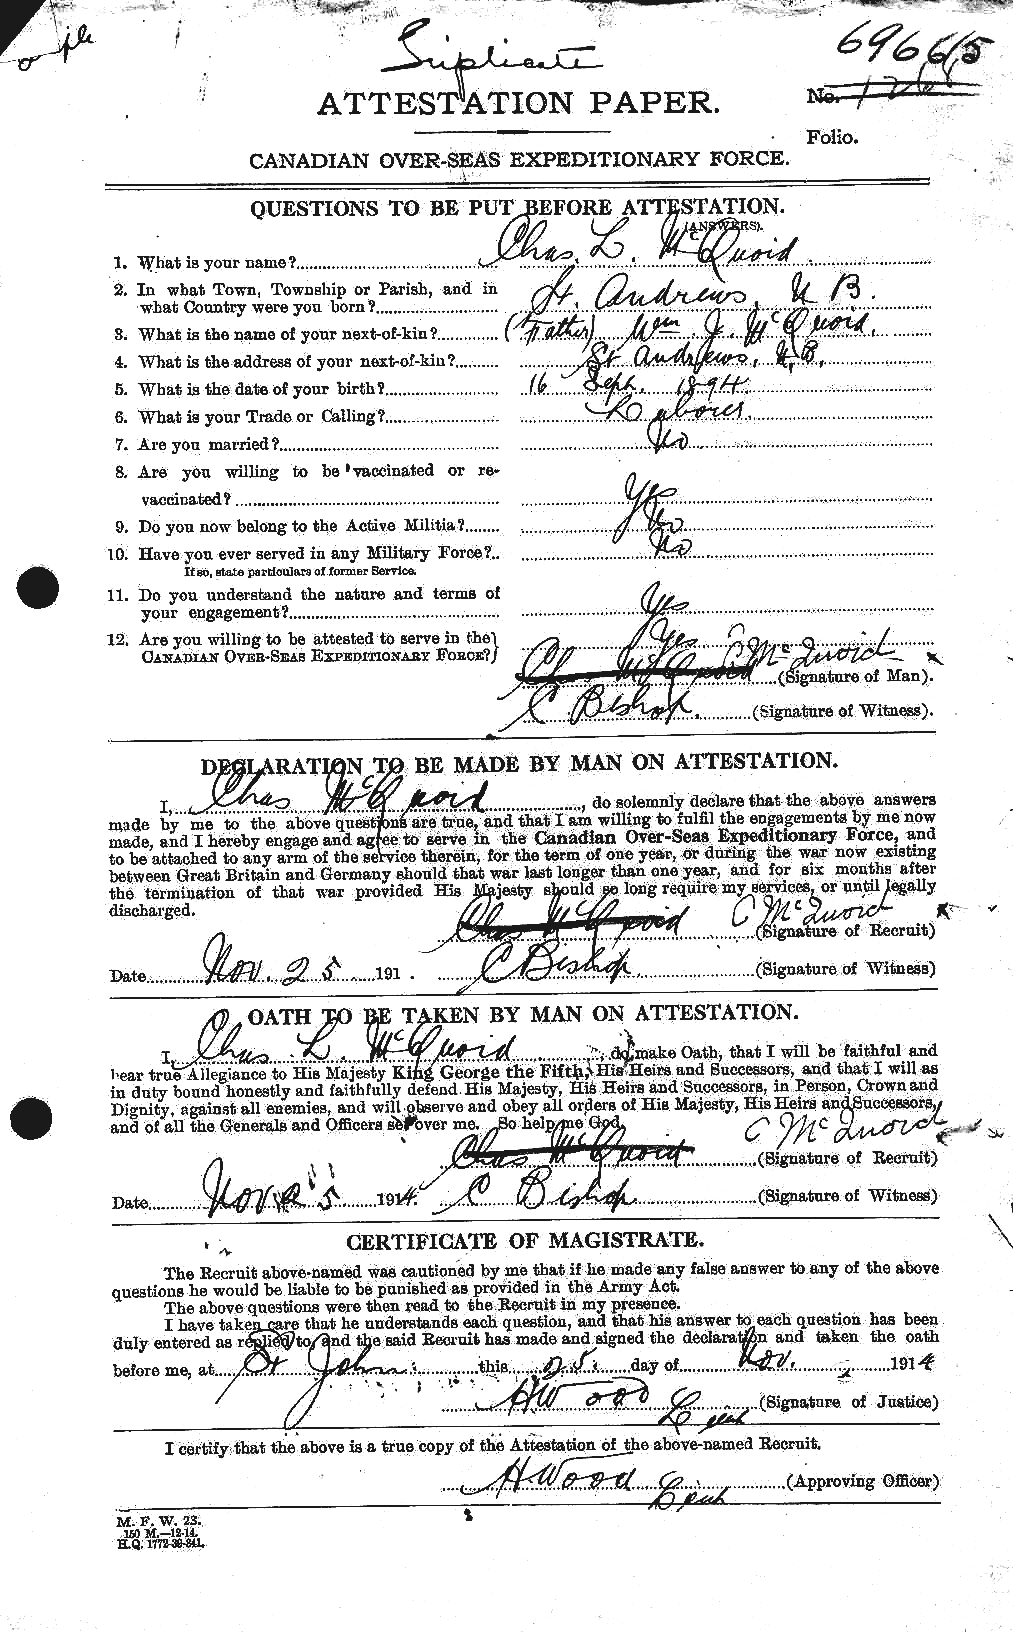 Personnel Records of the First World War - CEF 546071a